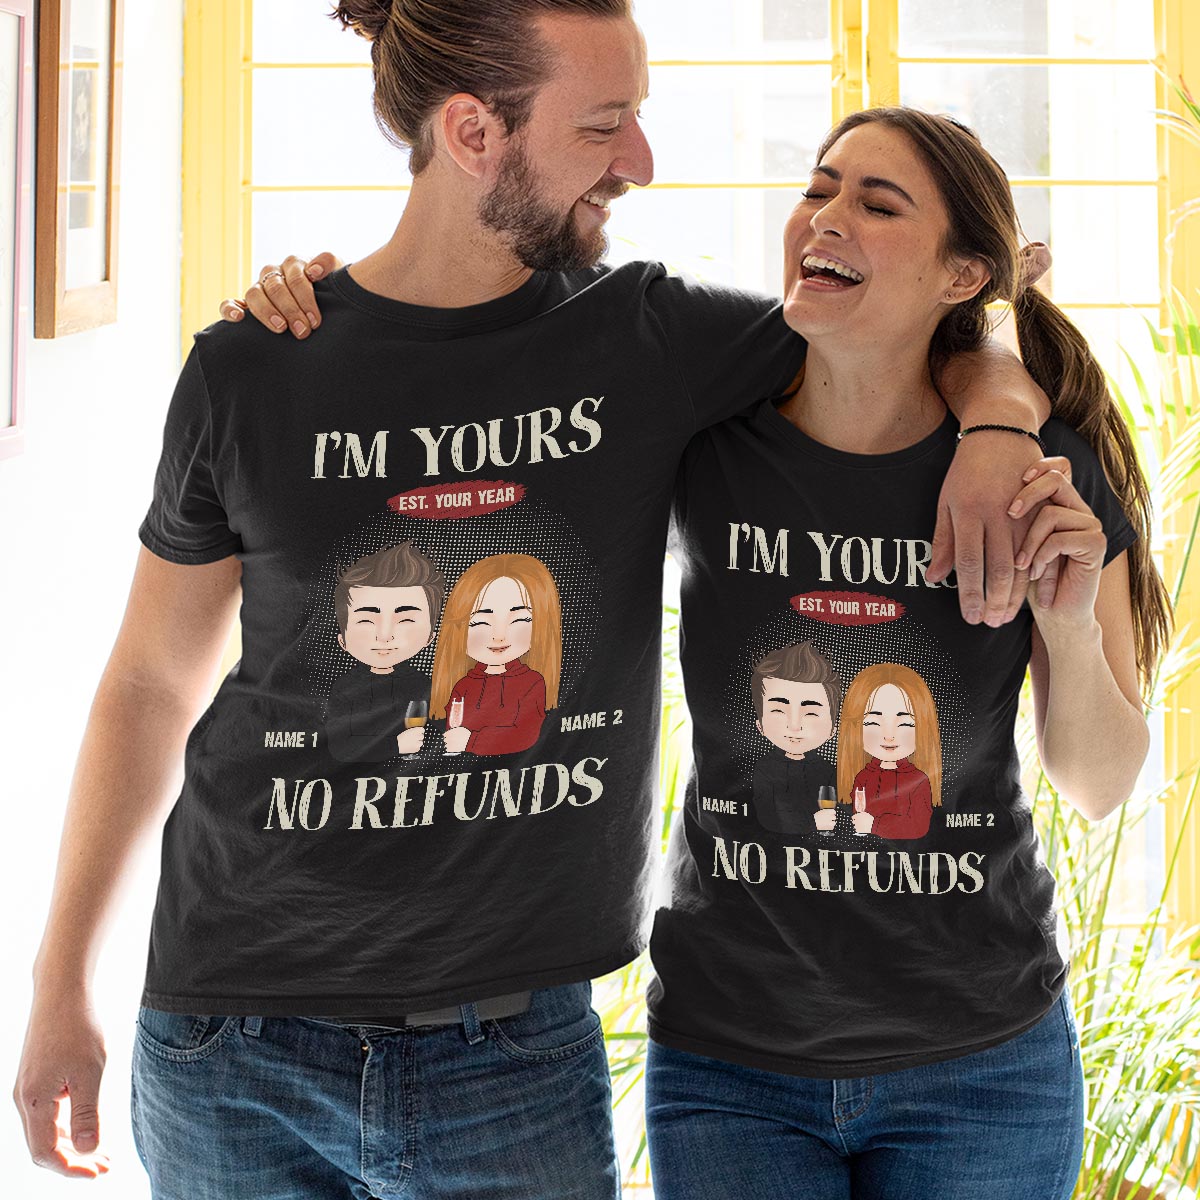 I'm Yours No Refunds Personalized Custom Shirts for Men Woman Loving Gift For Couple Husband, Wife Valentine day